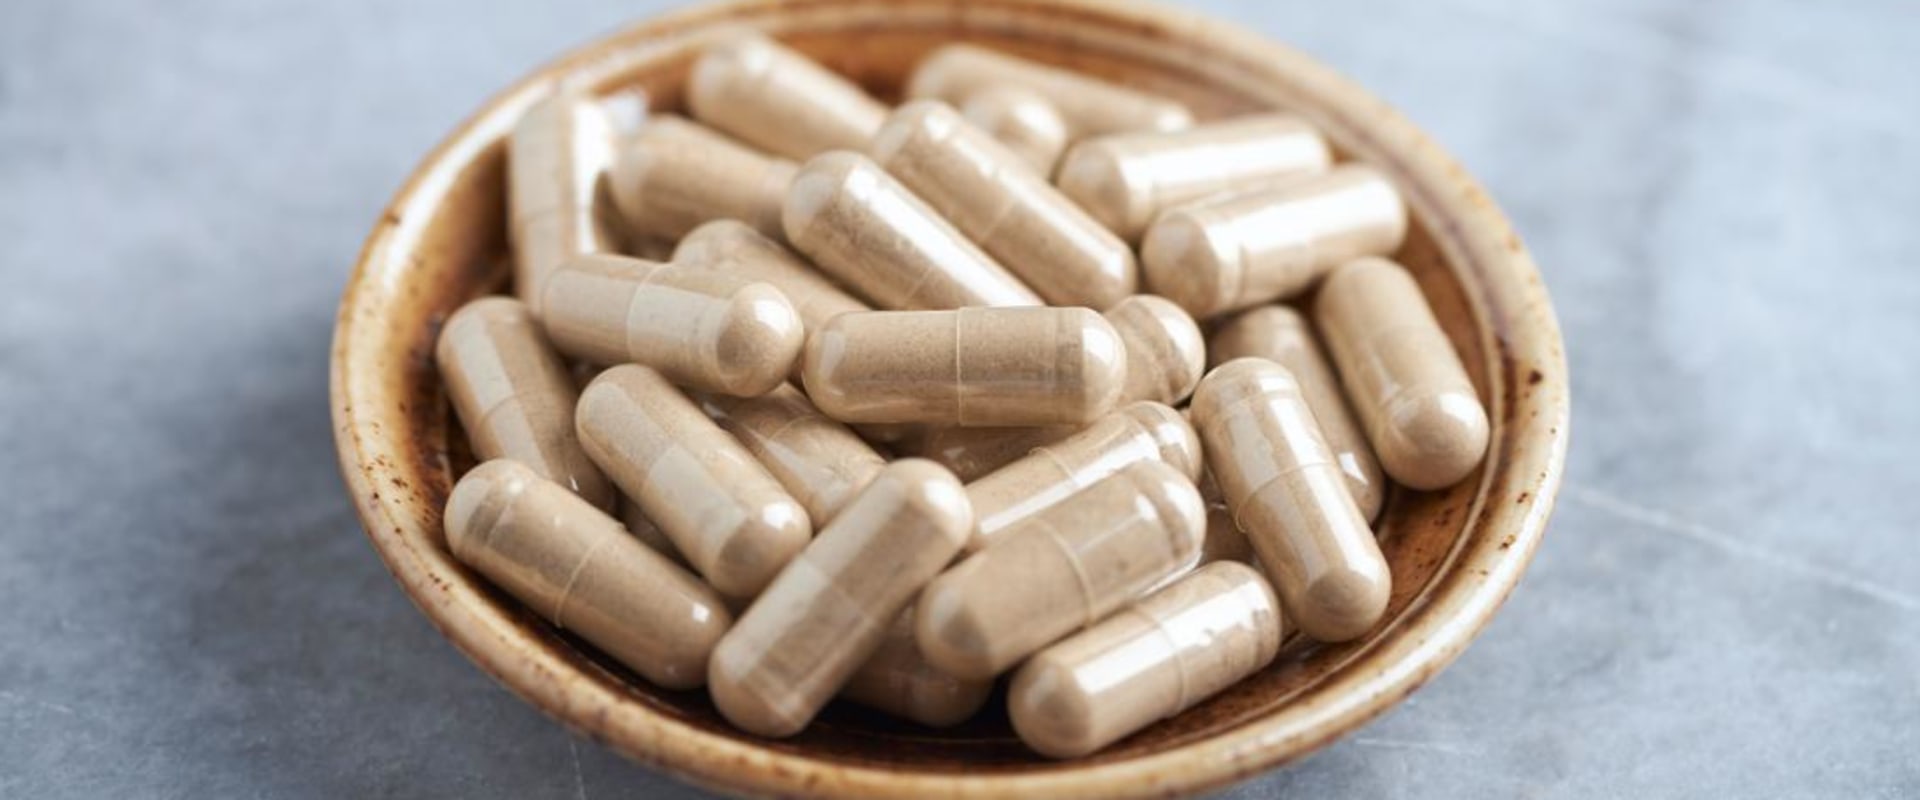 What is the number 1 supplements in the world?